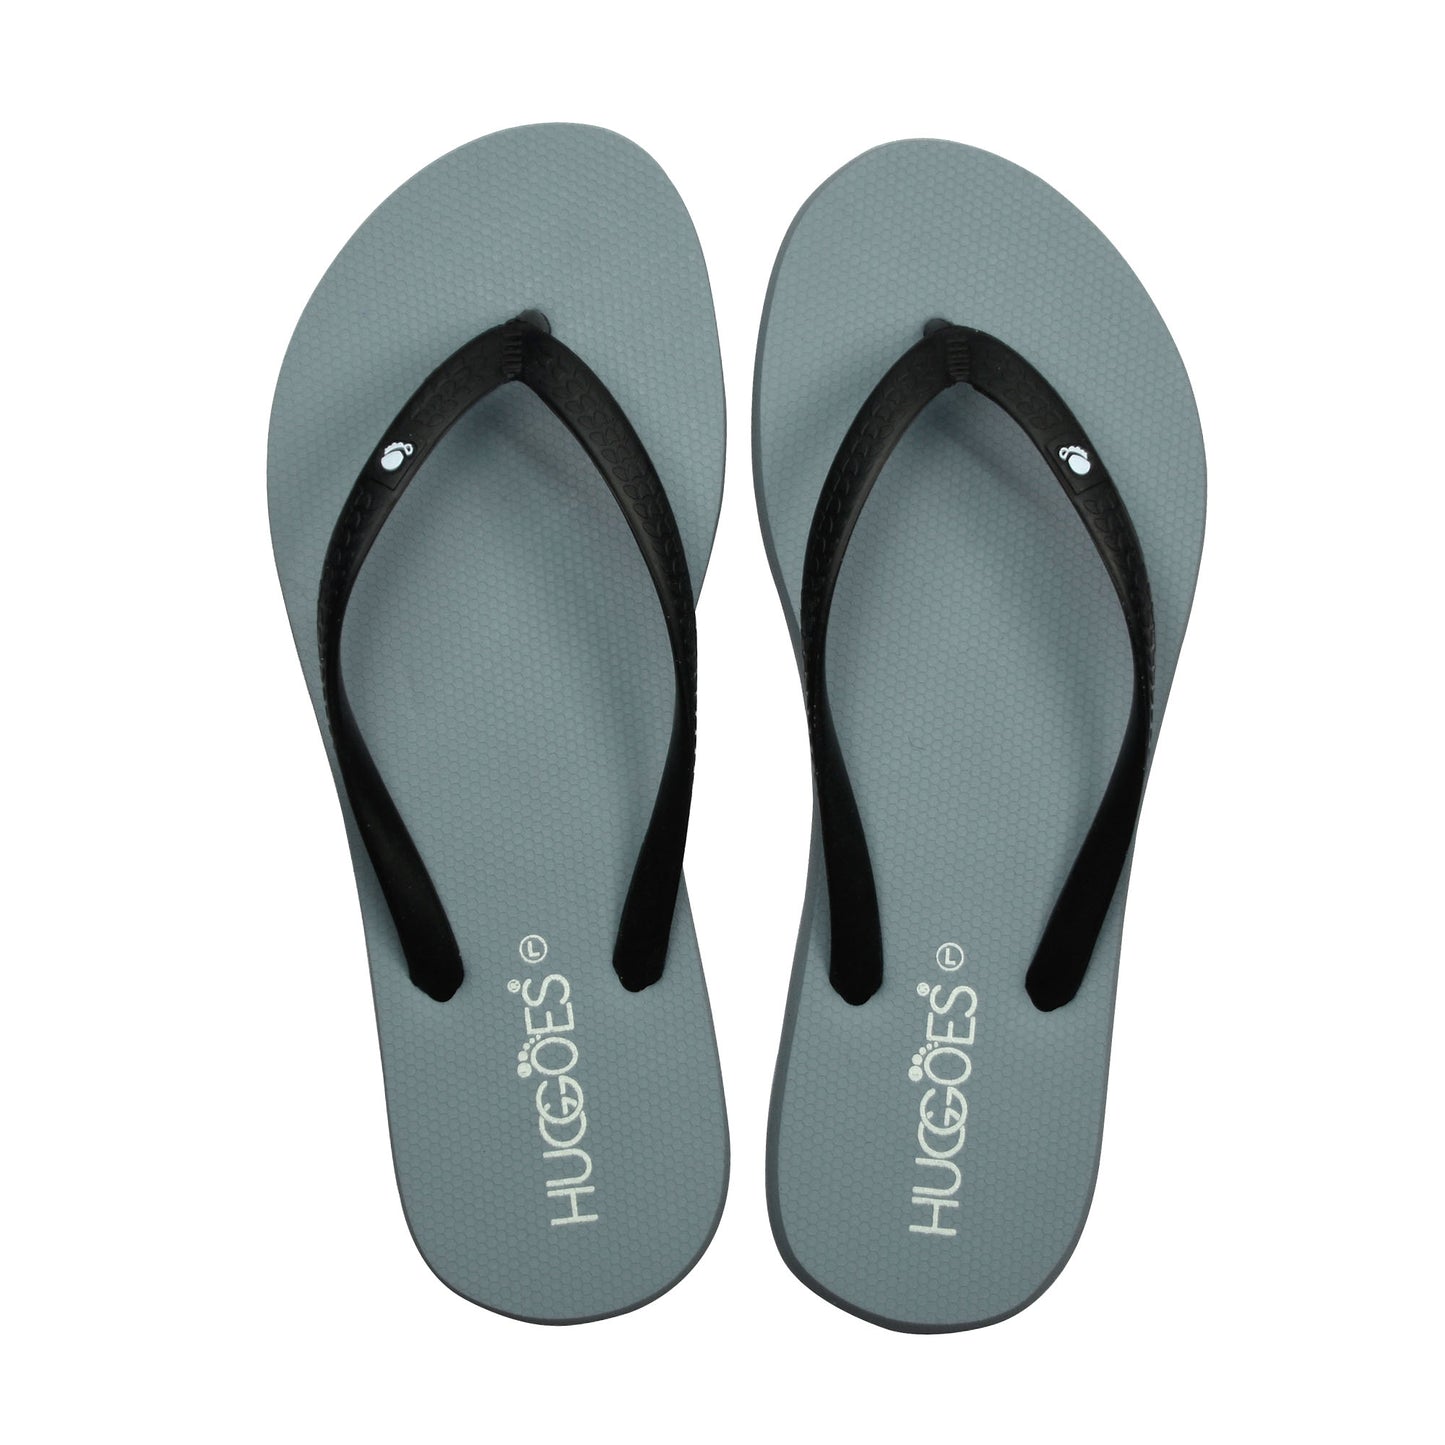 Huggoes By Aerothotic - Tinted Women's Natural Rubber Summer Flip-Flops - Original Thailand Imported - (BK2)